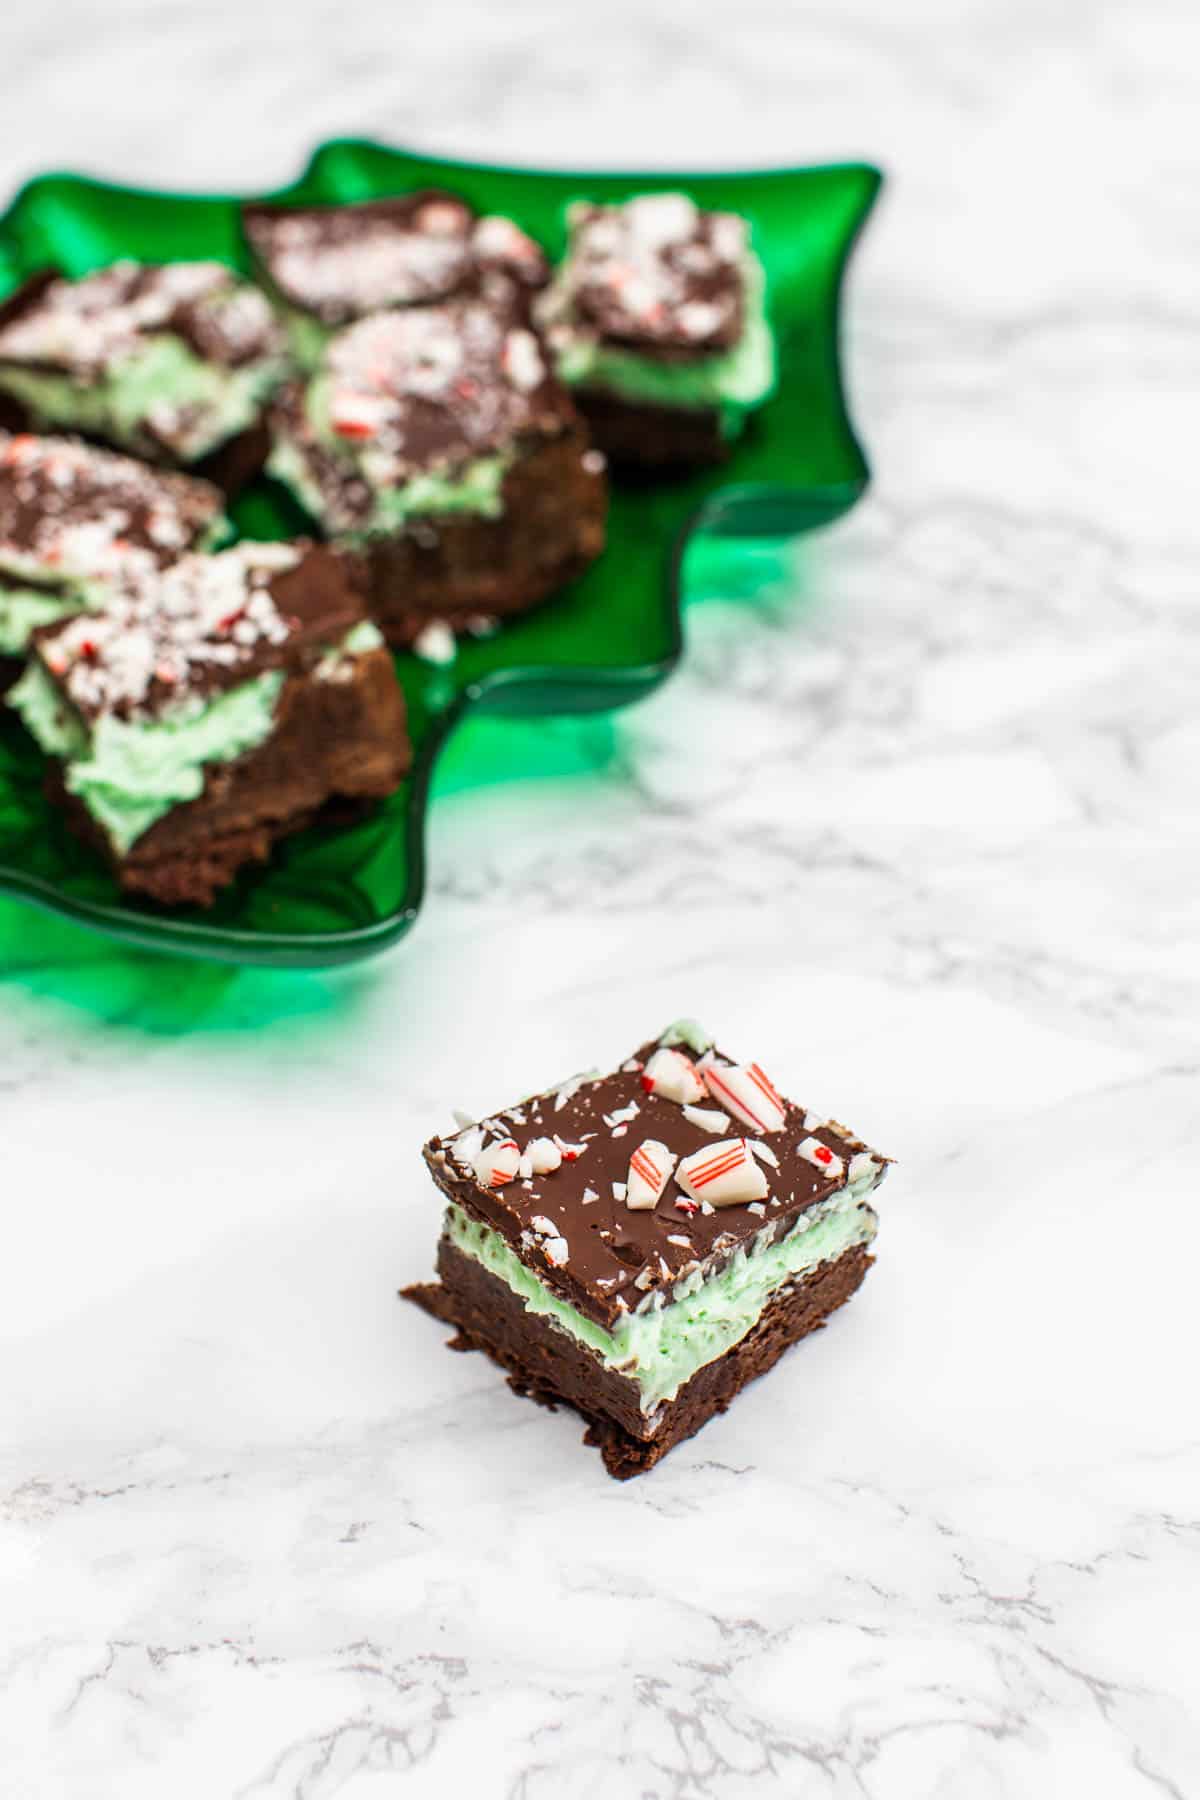 Chocolate peppermint cream bar with green tray of bars in the background